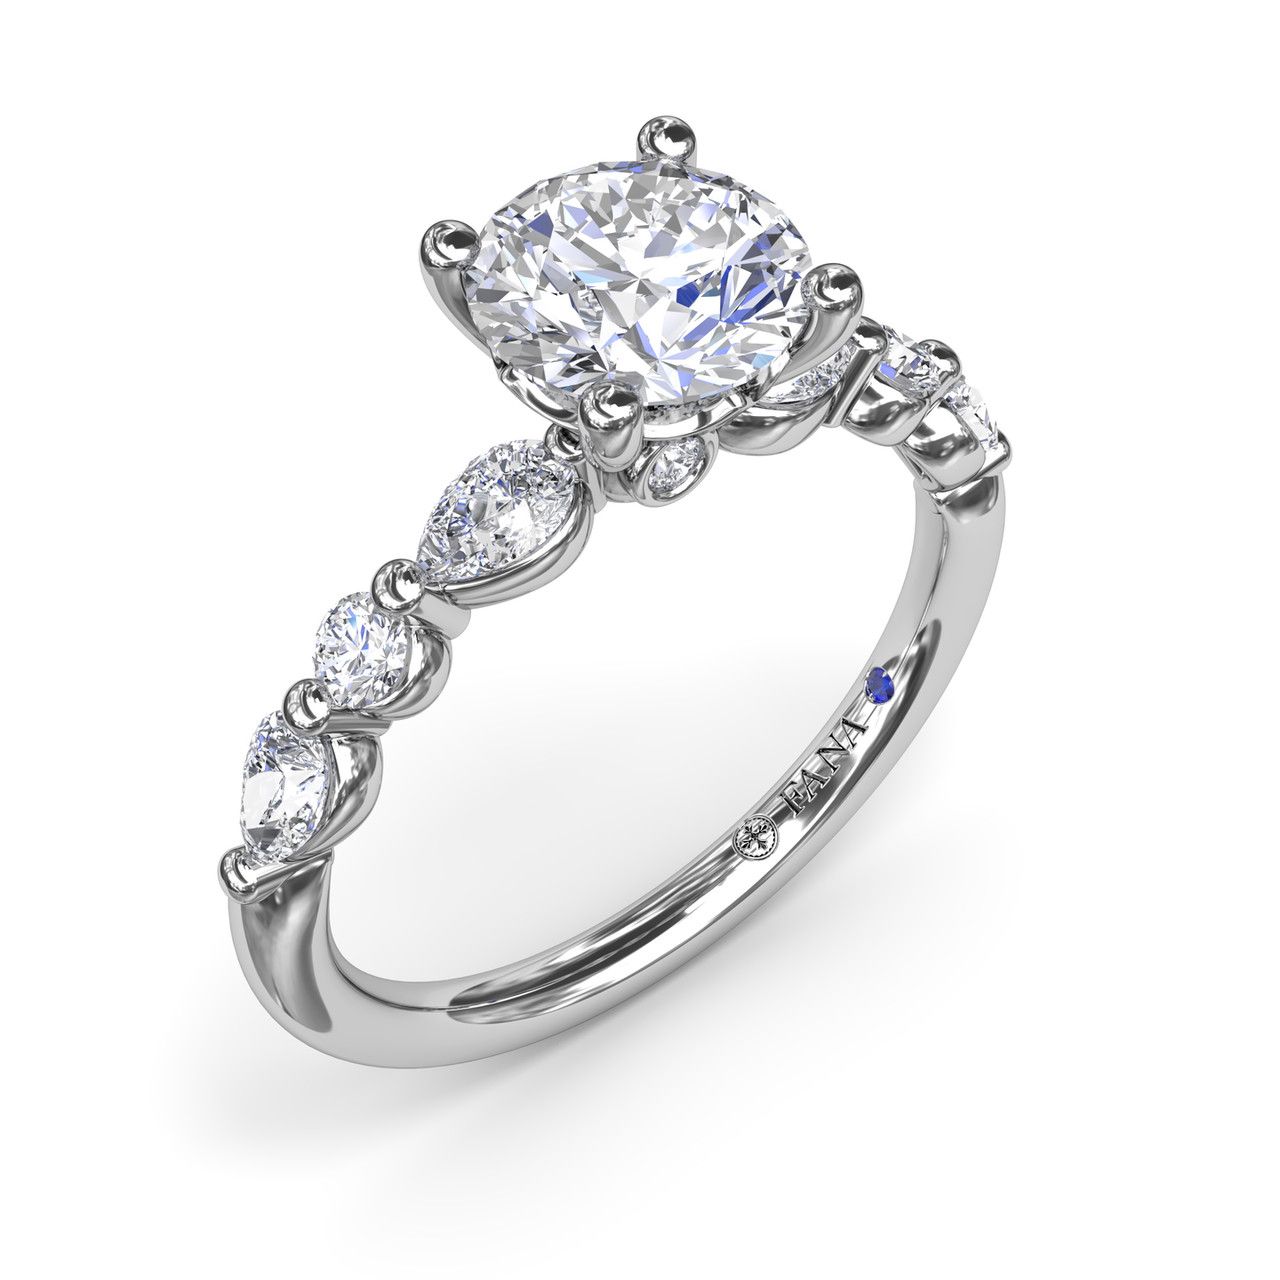 14K WHITE GOLD SHARED PRONG SEMI-MOUNT RING SIZE 6.5 WITH 6=0.52TW VARIOUS SHAPES (4 PEARS & 2 ROUNDS) G-H VS2-SI1 DIAMONDS AND ONE ROUND BLUE SAPPHIRE   (2.60 GRAMS)